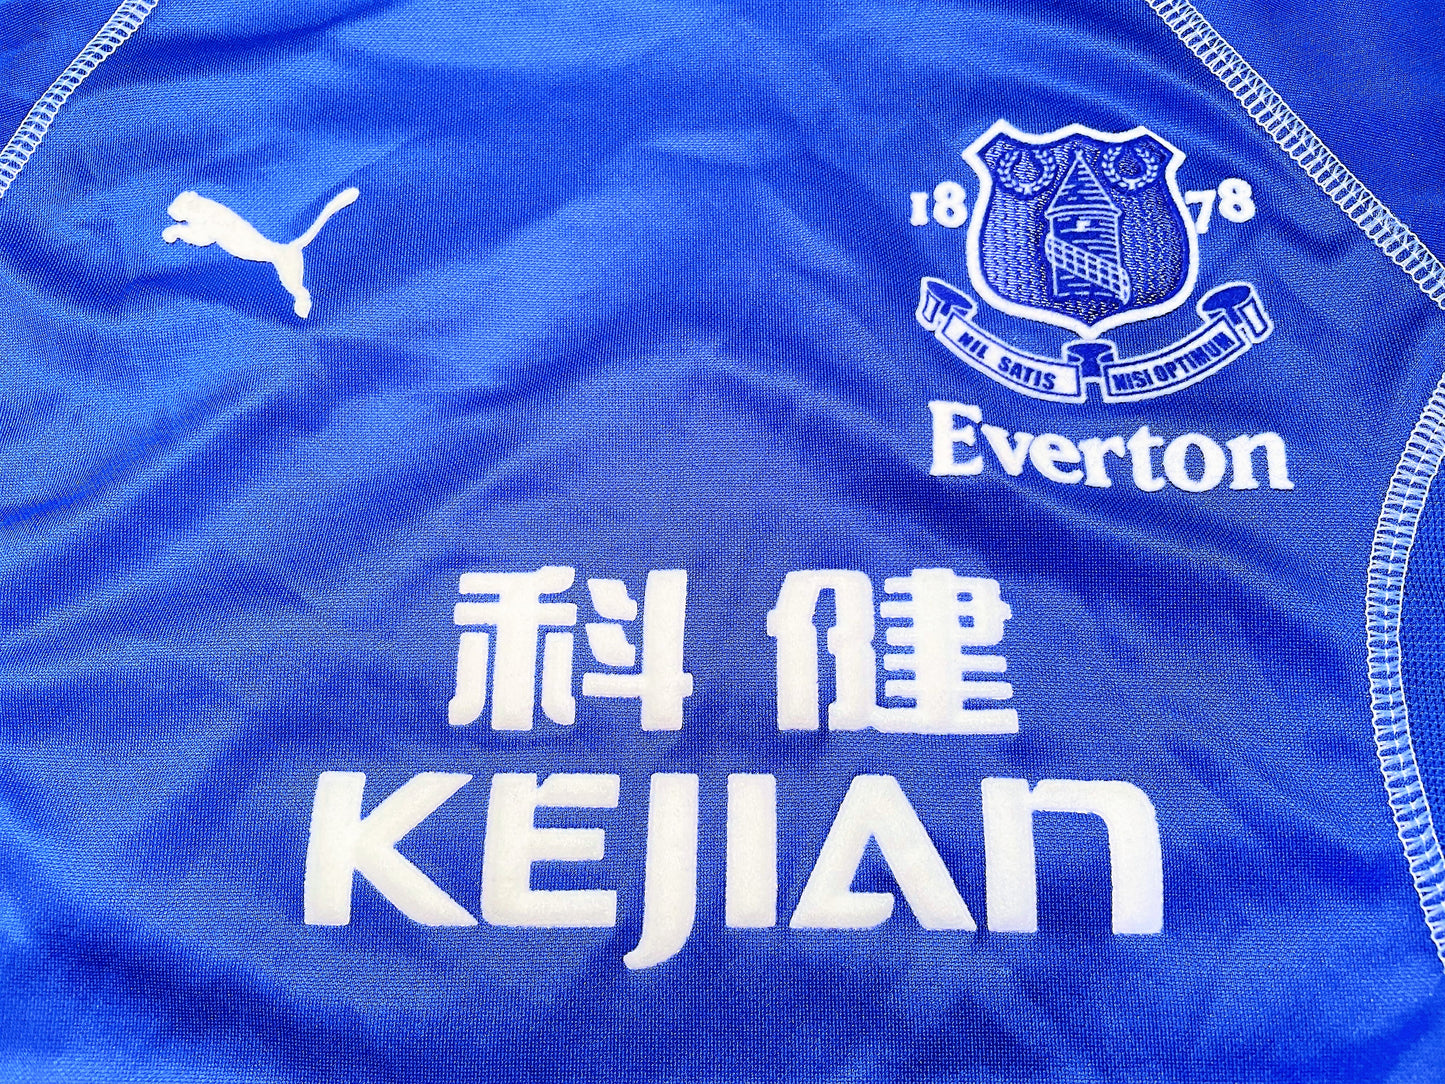 Everton Home Shirt 2002 (excellent) Adults XXS/Childs 26-28. Height 22 inches